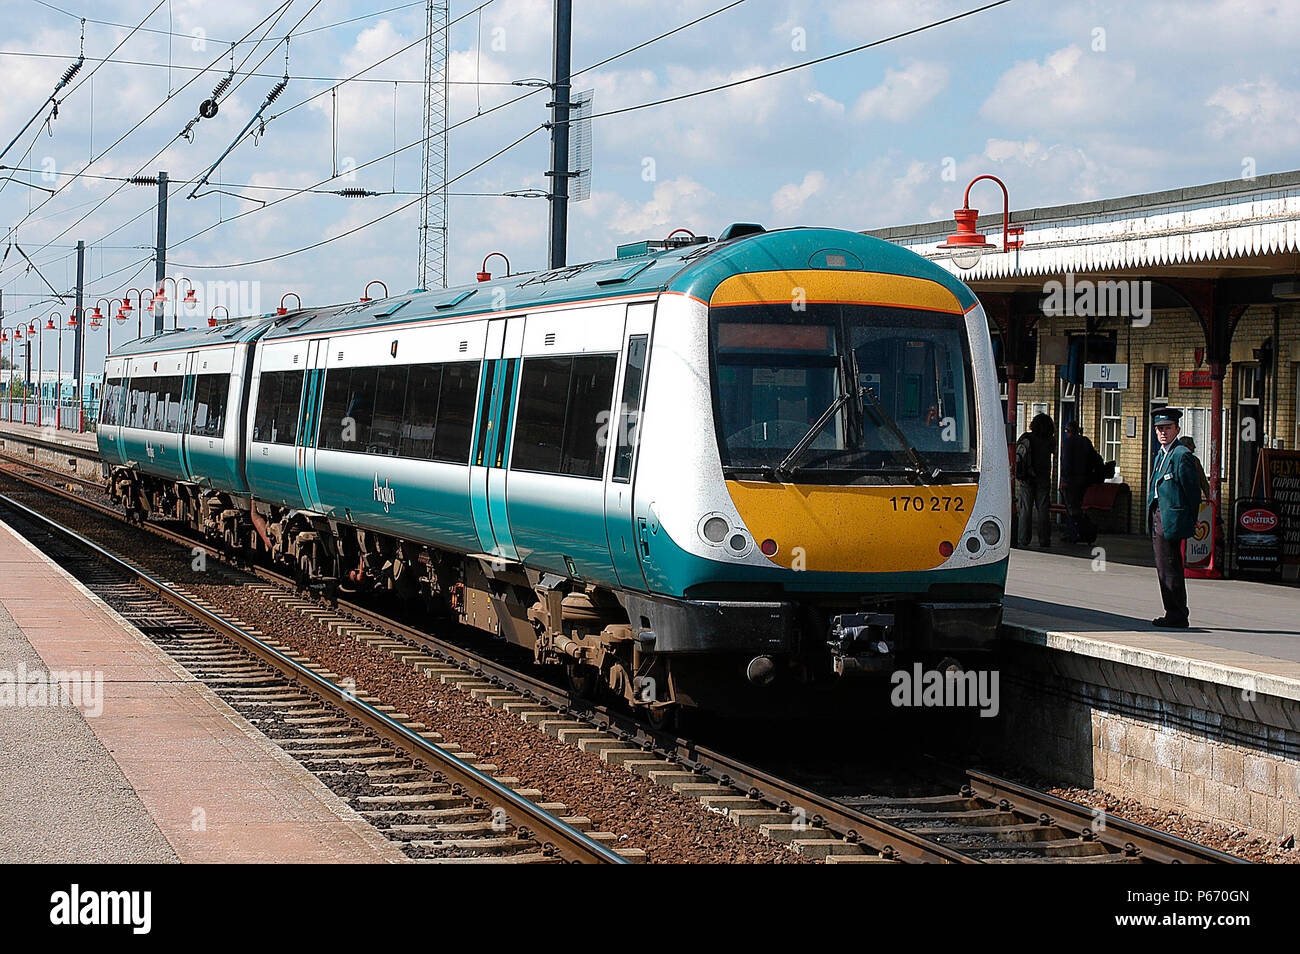 The introduction of Turbostar units has helped to provide new services such as the 4 units dedicated to the Norwich - Cambridge hourly service, one of Stock Photo